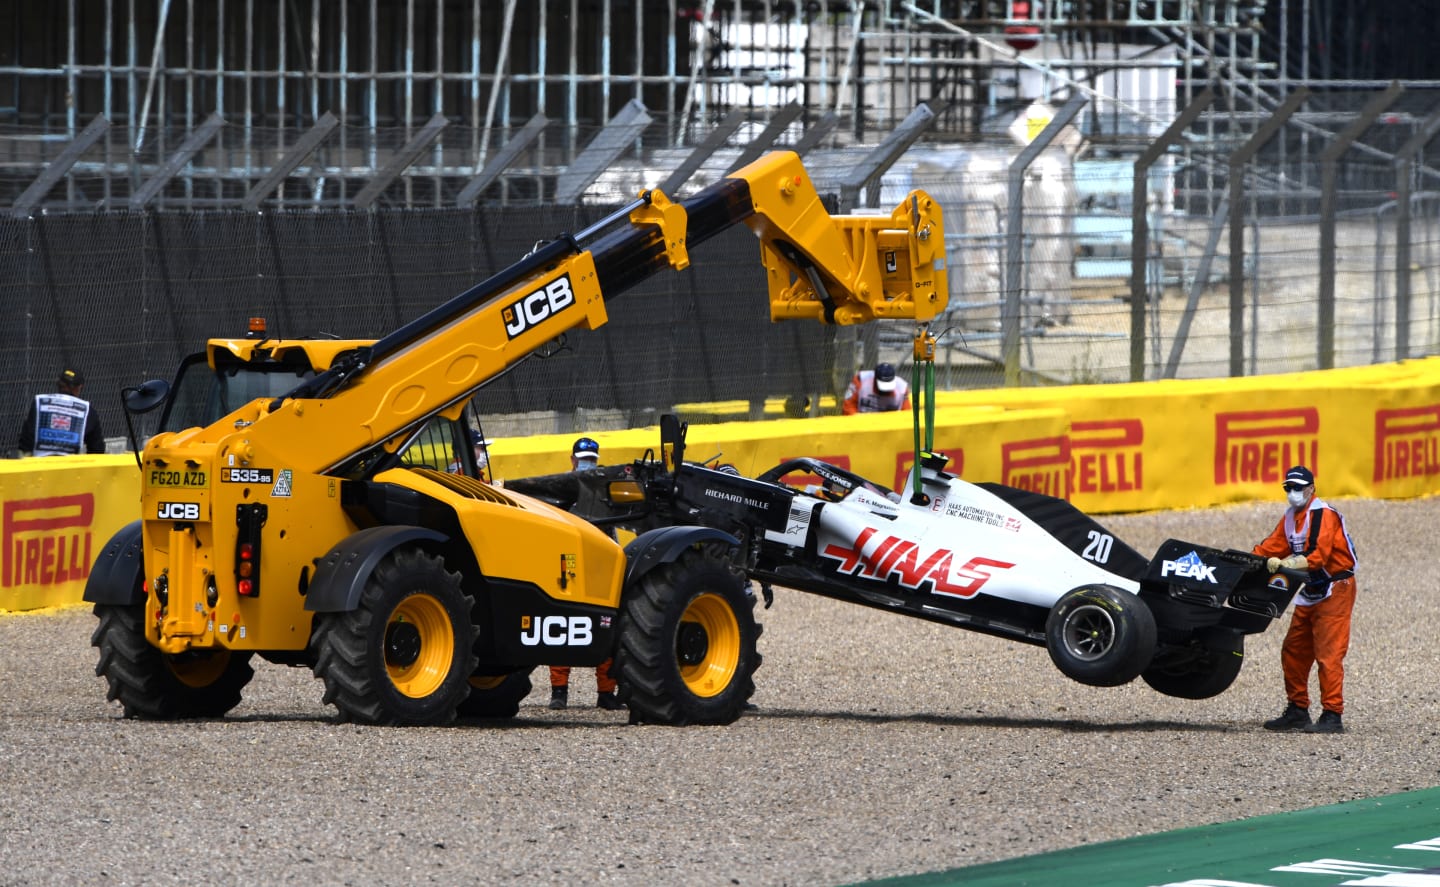 NORTHAMPTON, ENGLAND - AUGUST 02: The car of Kevin Magnussen of Denmark and Haas F1 is taken away